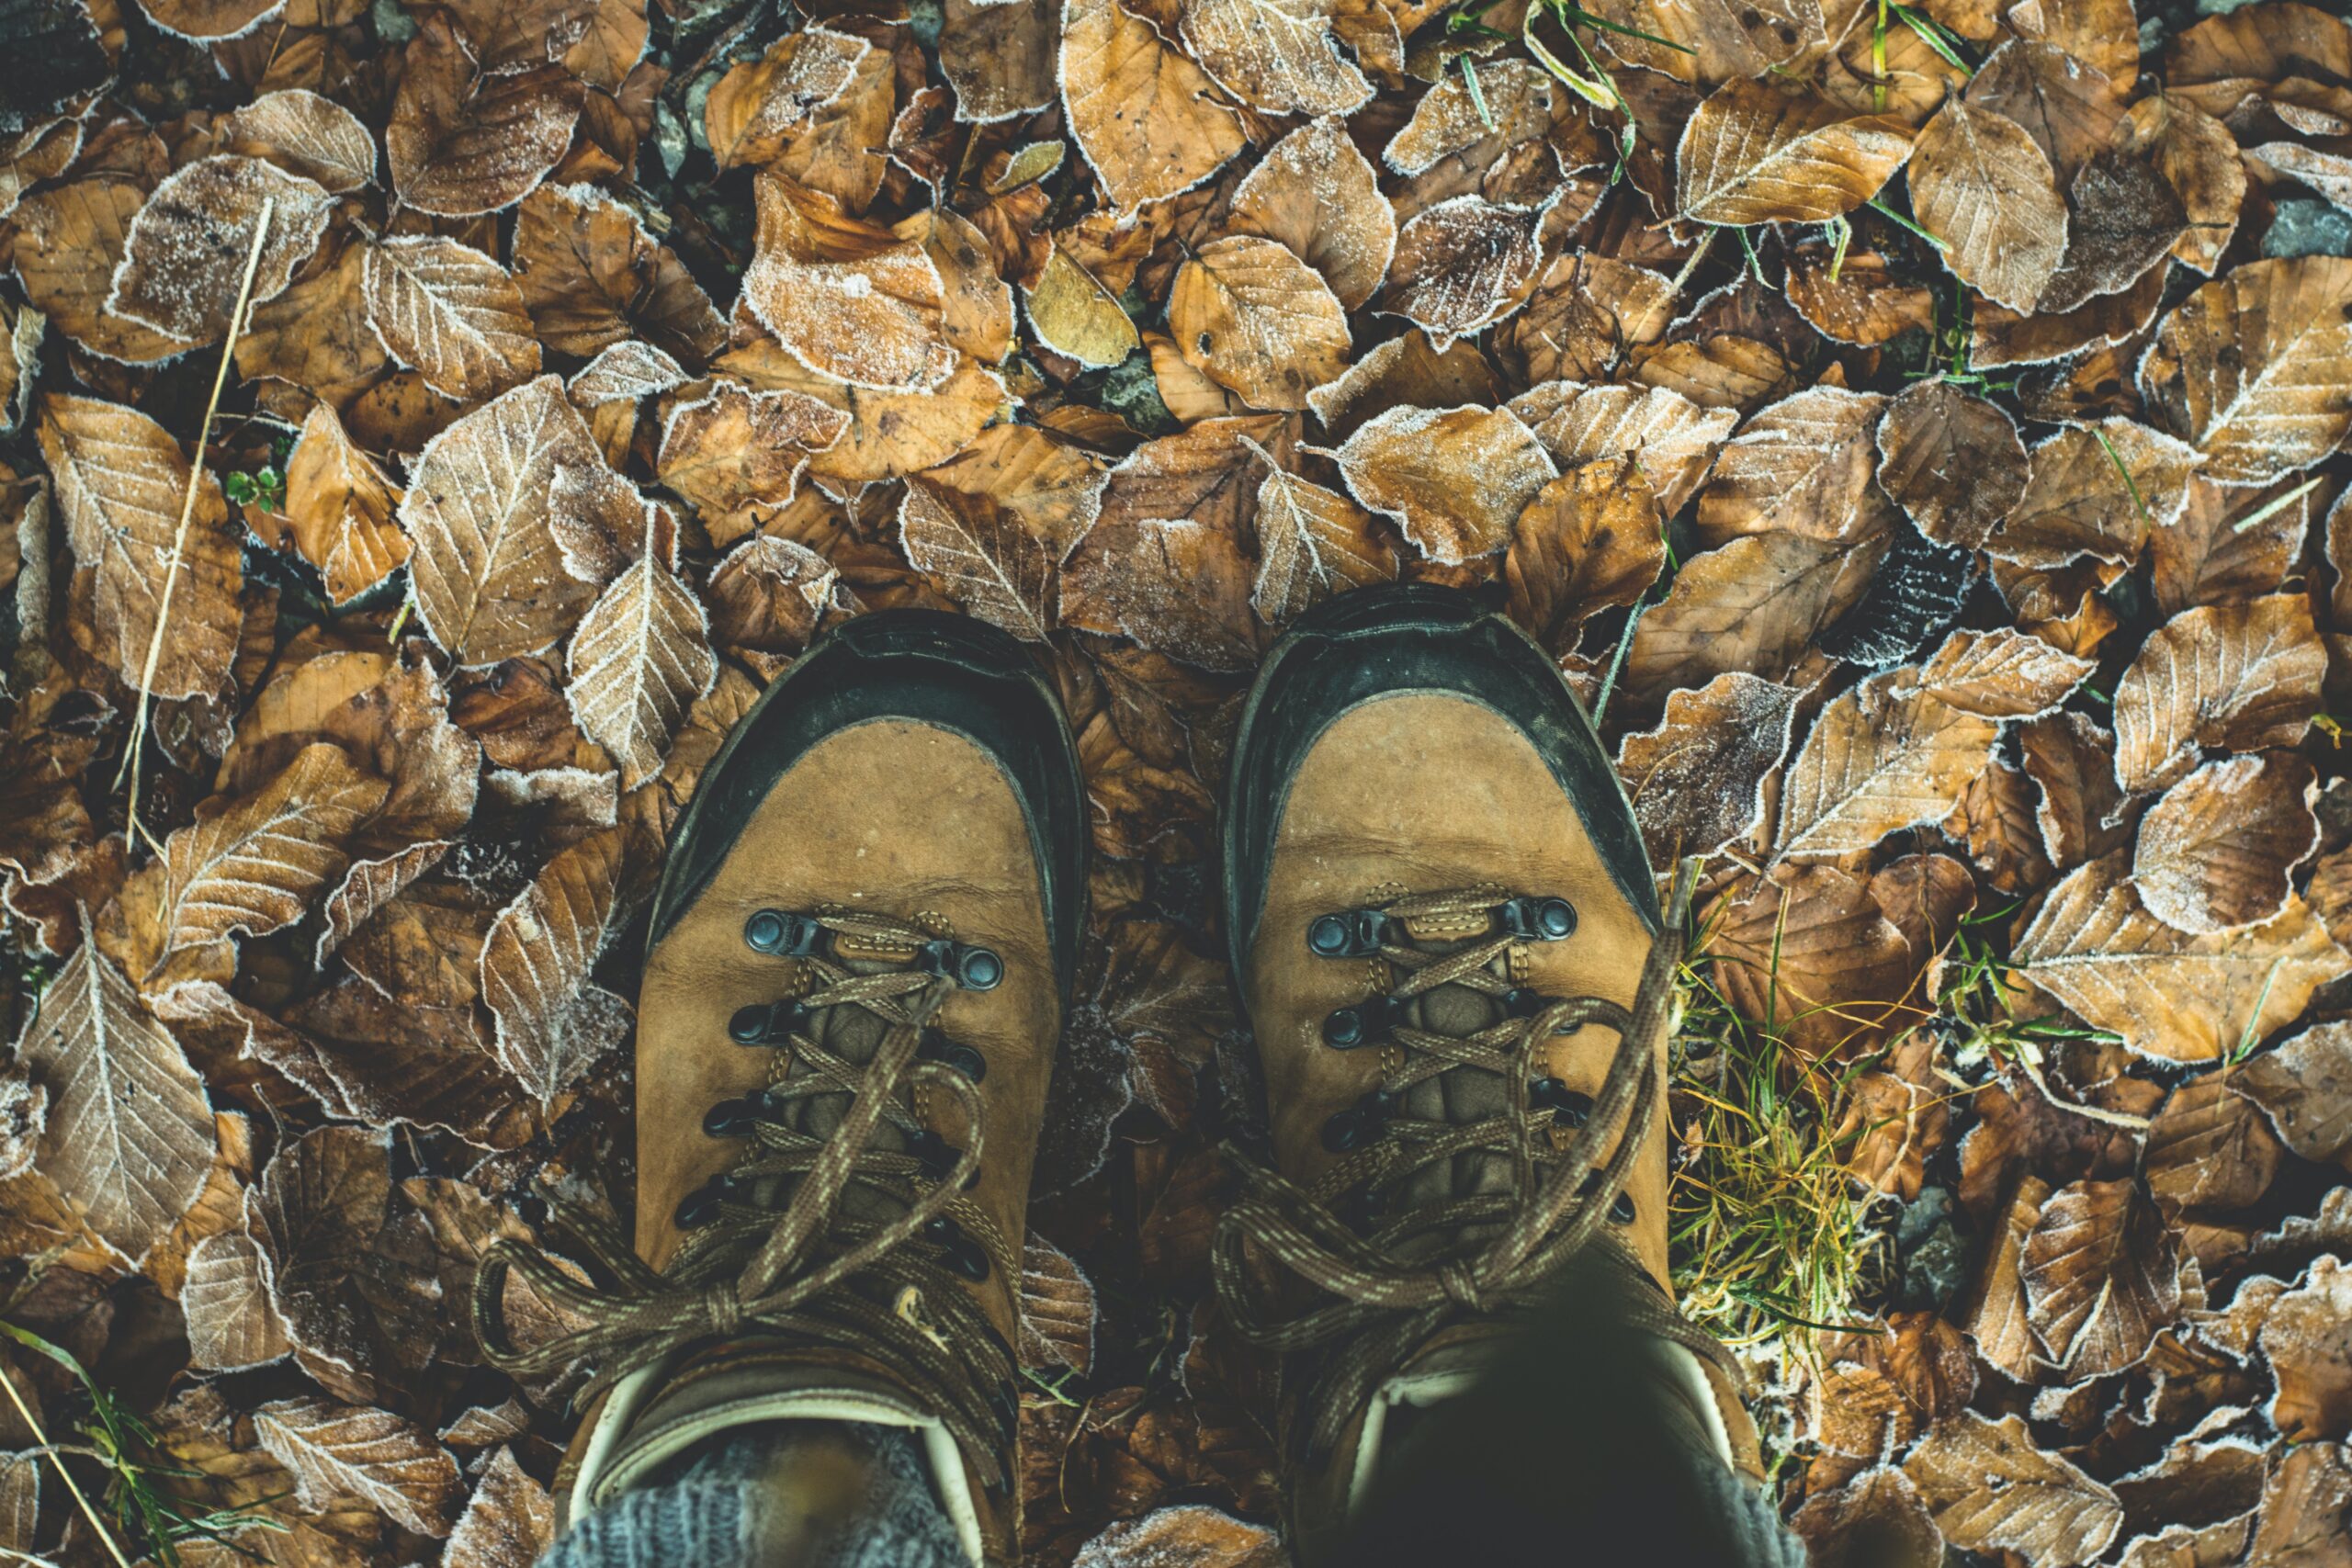 Hiking Boots on Autumn Leaves